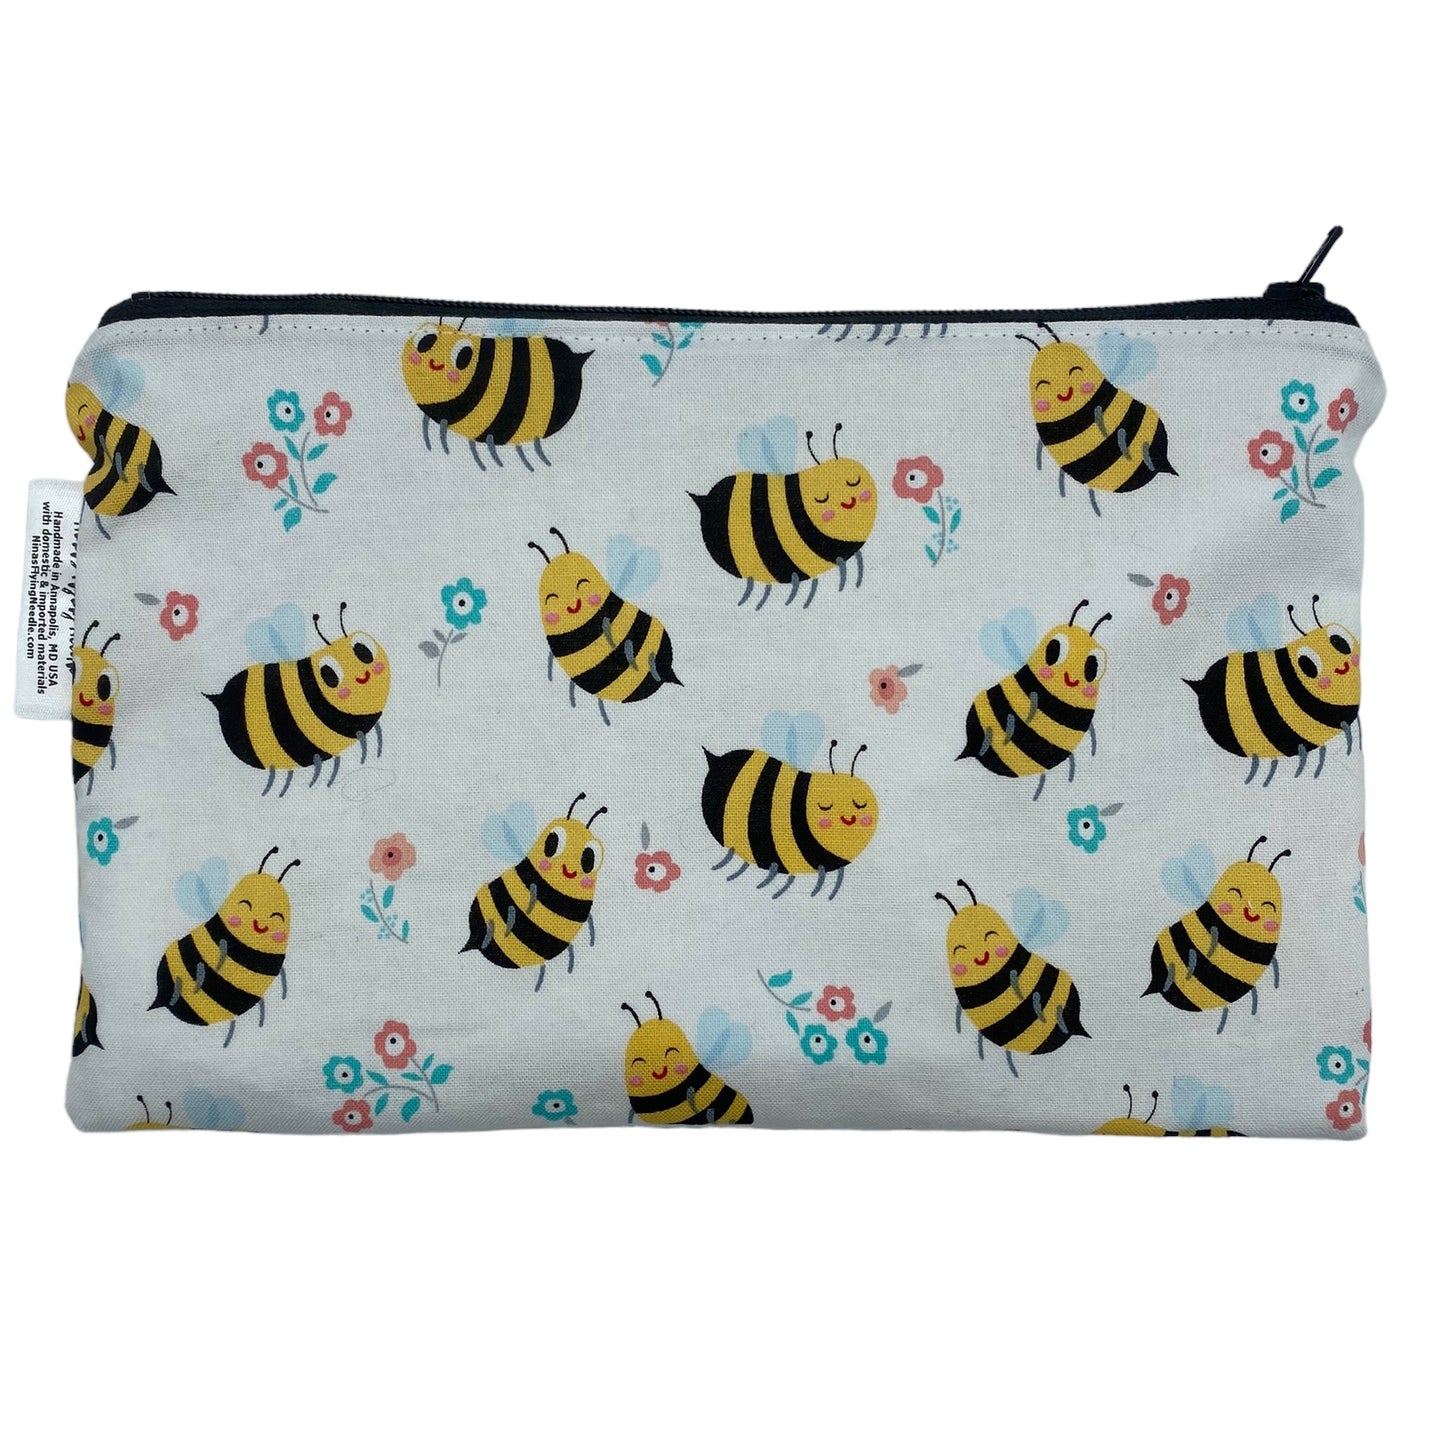 Snack Sized Reusable Zippered Bag Bumbling Bees Smiling